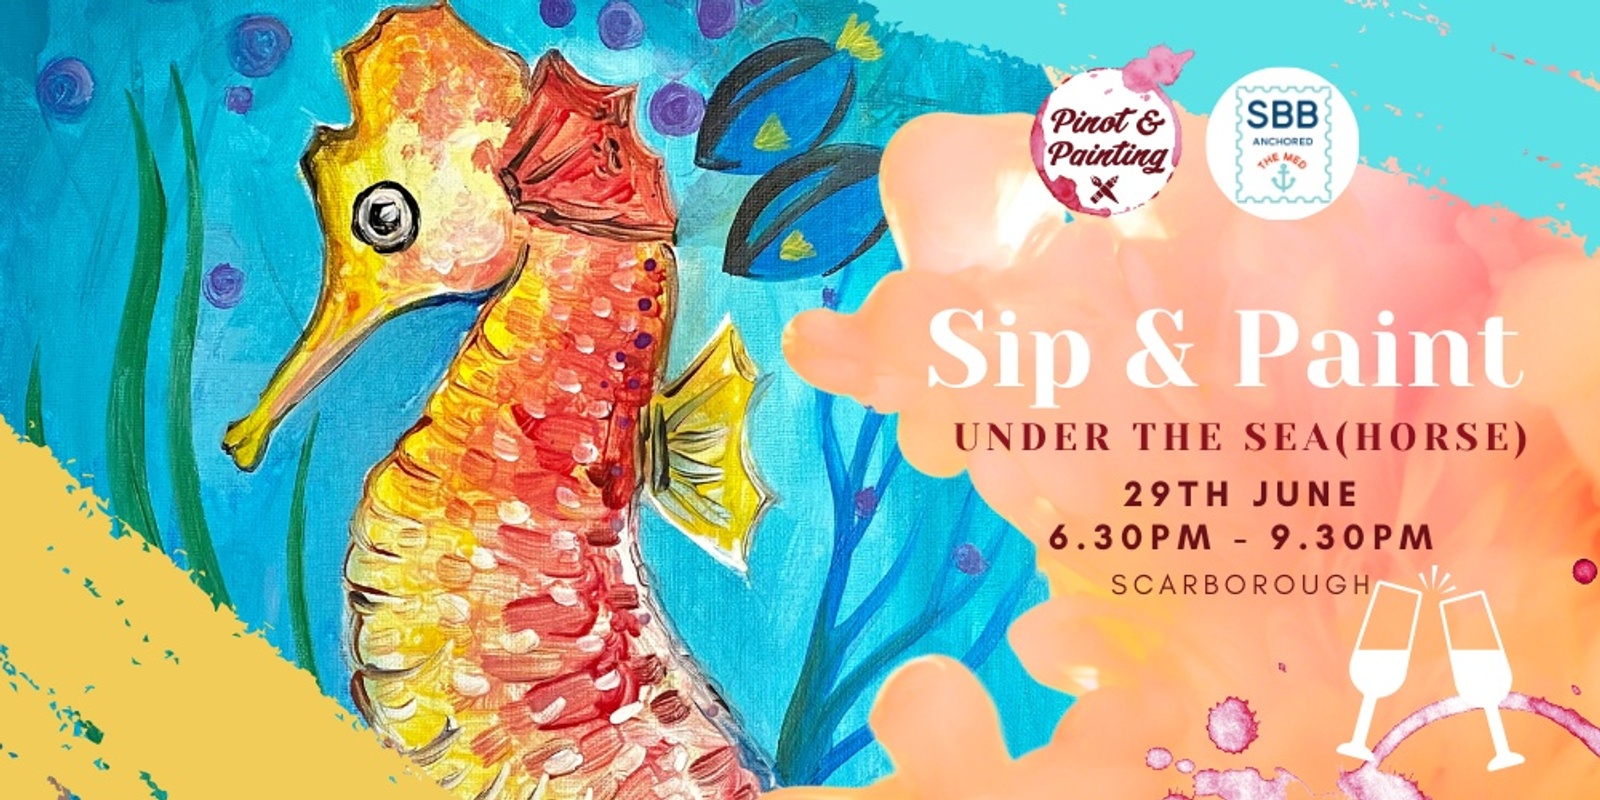 Banner image for Under the Sea(horse) - Sip & Paint @ Scarborough Beach Bar